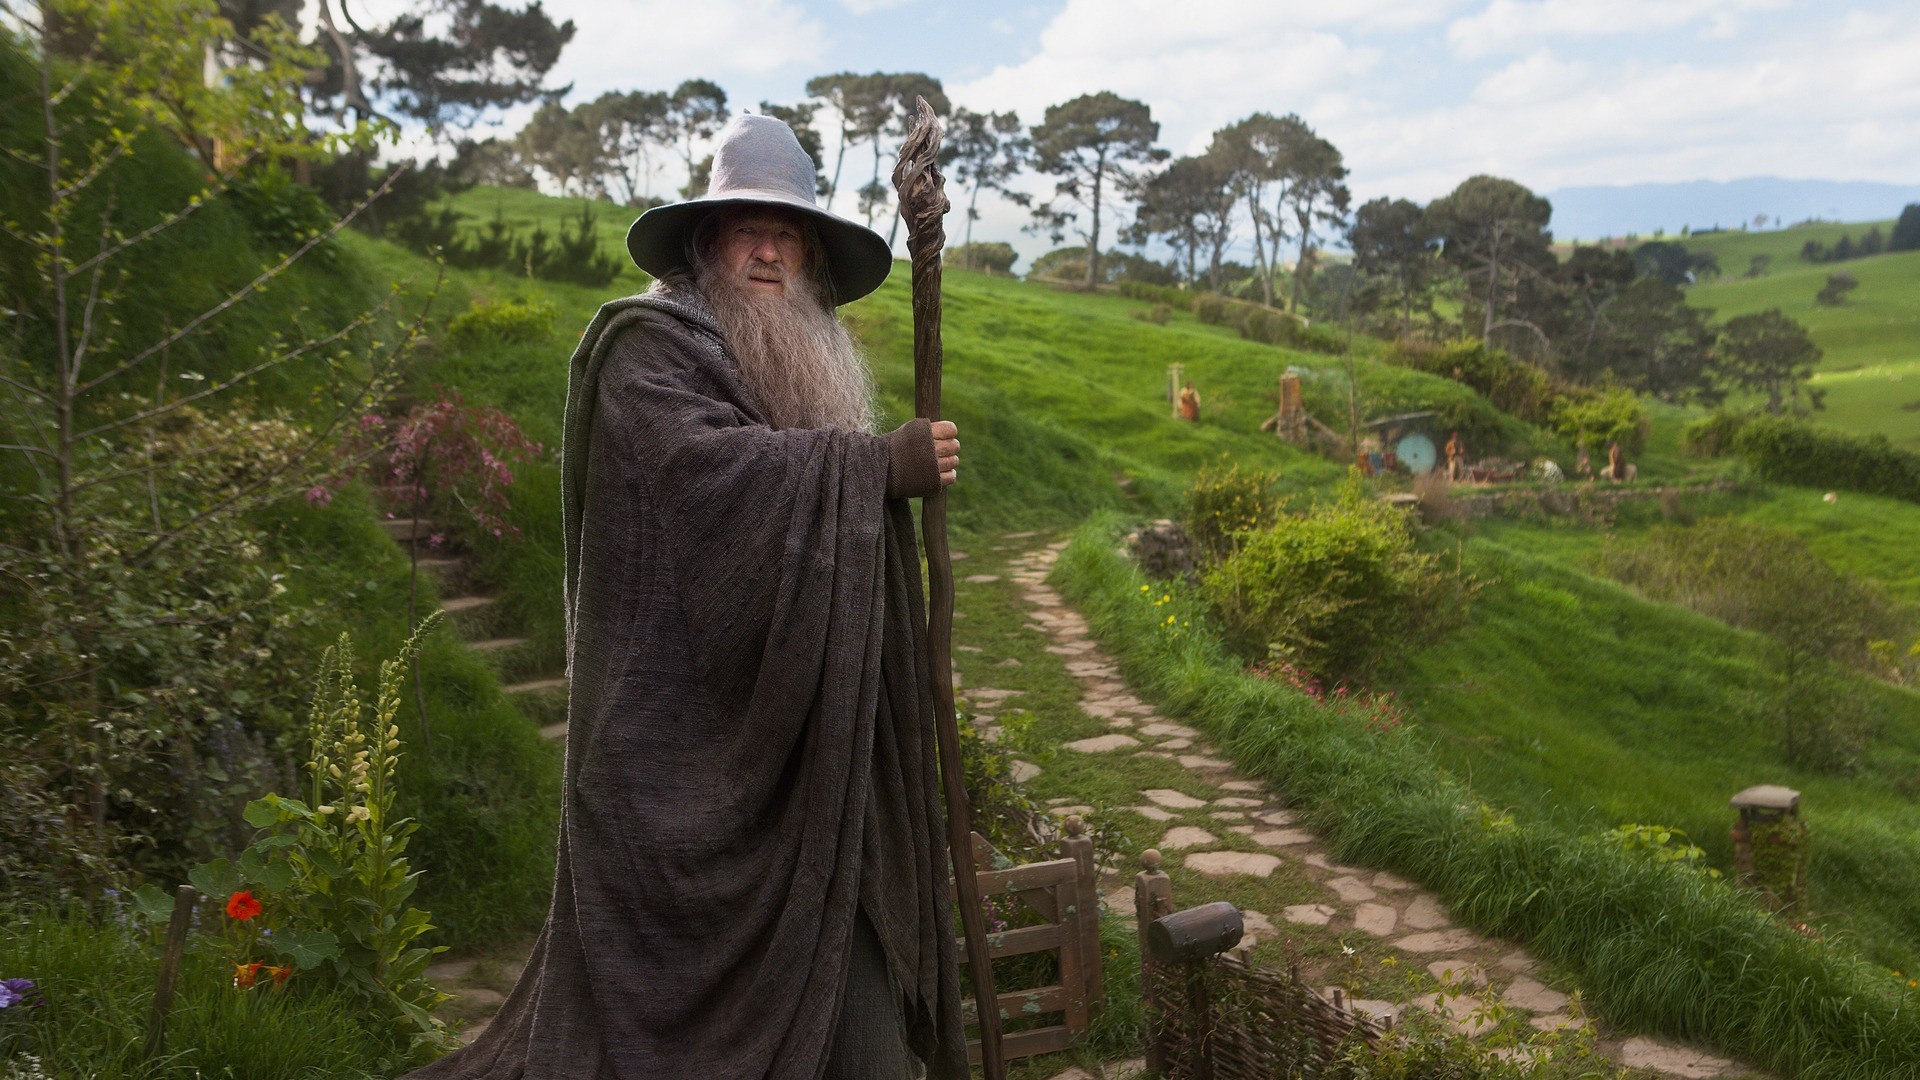 People 1920x1080 The Lord of the Rings Gandalf The Shire wizard Ian McKellen movies staff